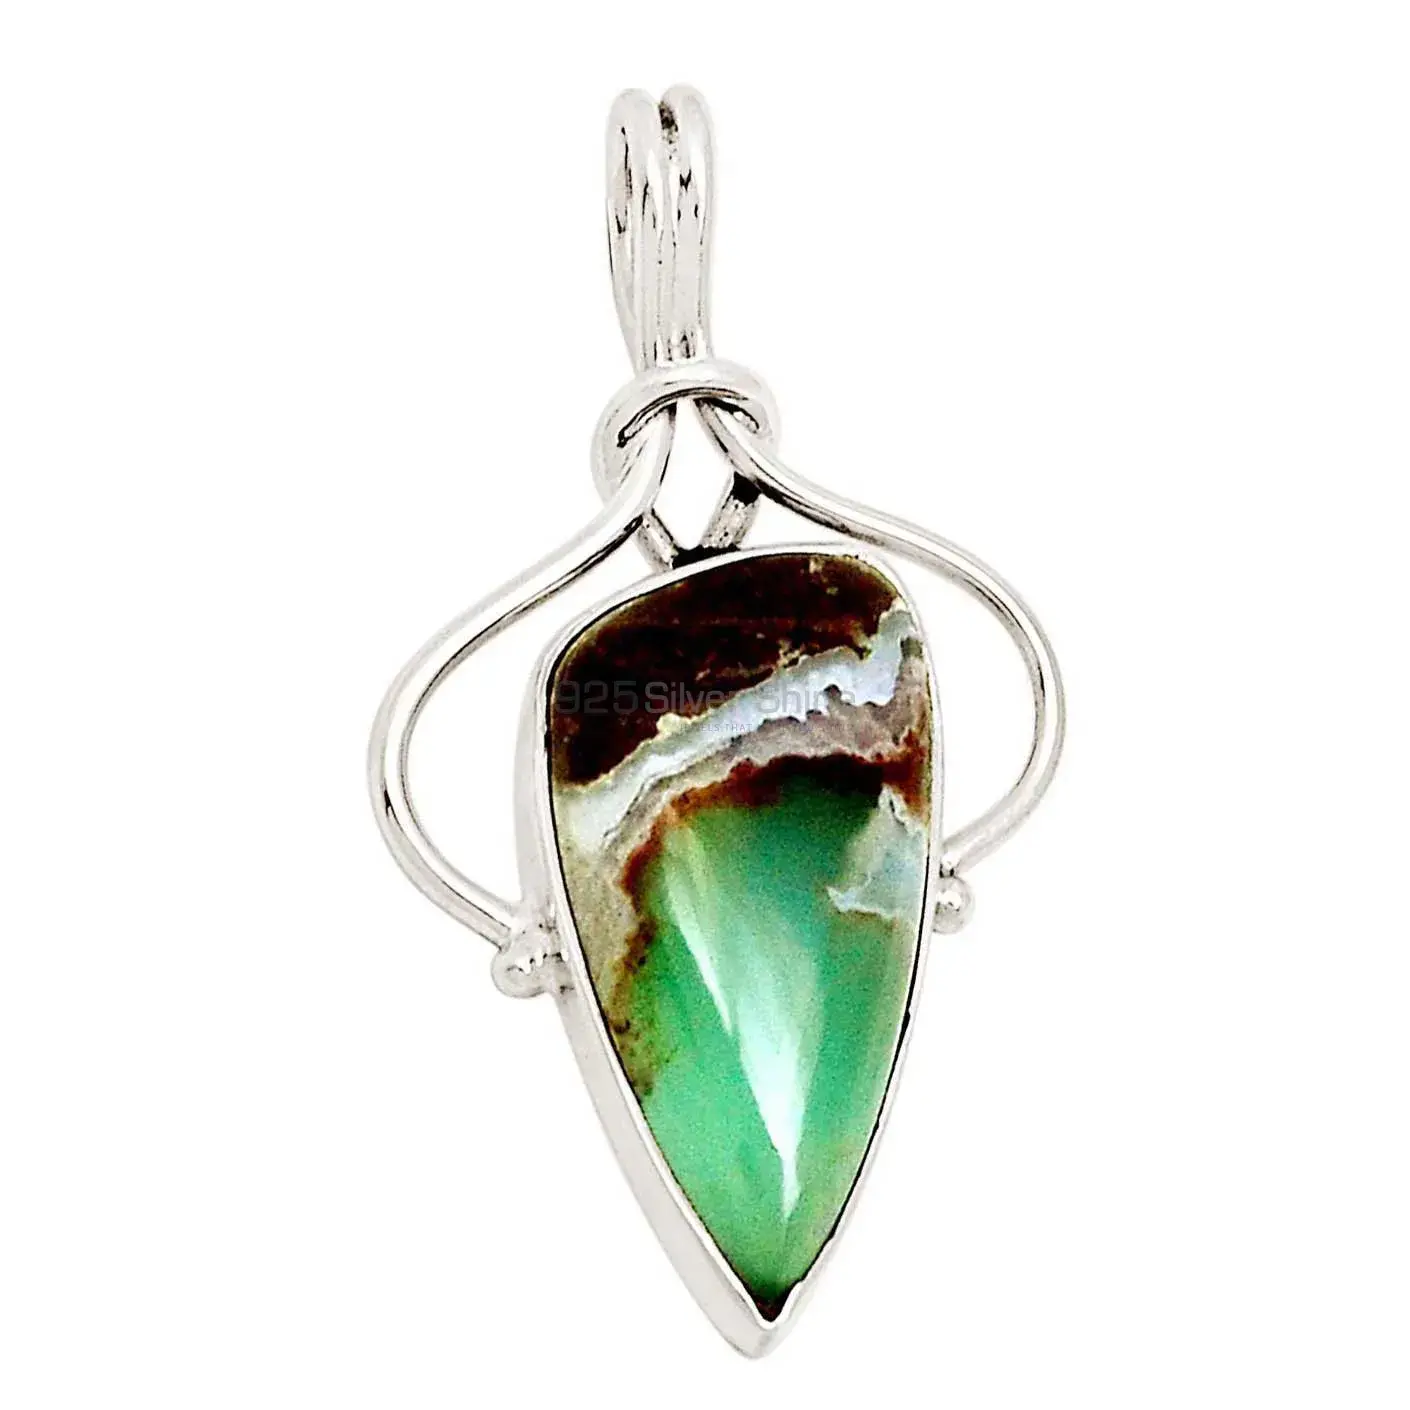 Best Quality Solid Sterling Silver Handmade Pendants In Chrysoprase Gemstone Jewelry 925SP197_1